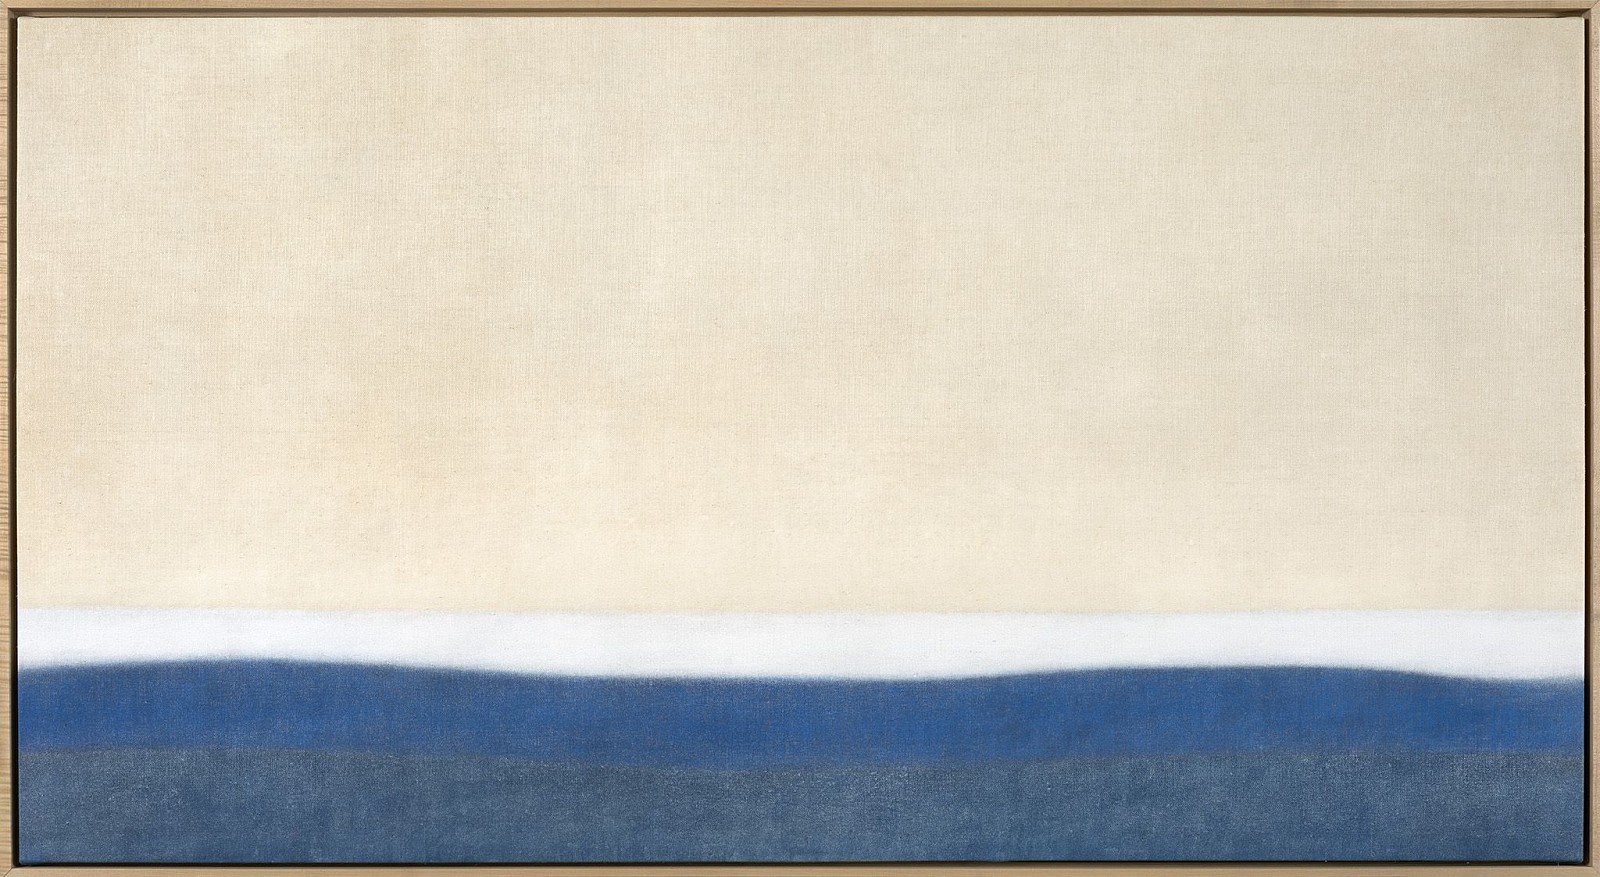 Susan Vecsey, Untitled (Pale/Blue) | SOLD, 2023
Oil on linen, 44 x 82 in. (111.8 x 208.3 cm)
VEC-00253